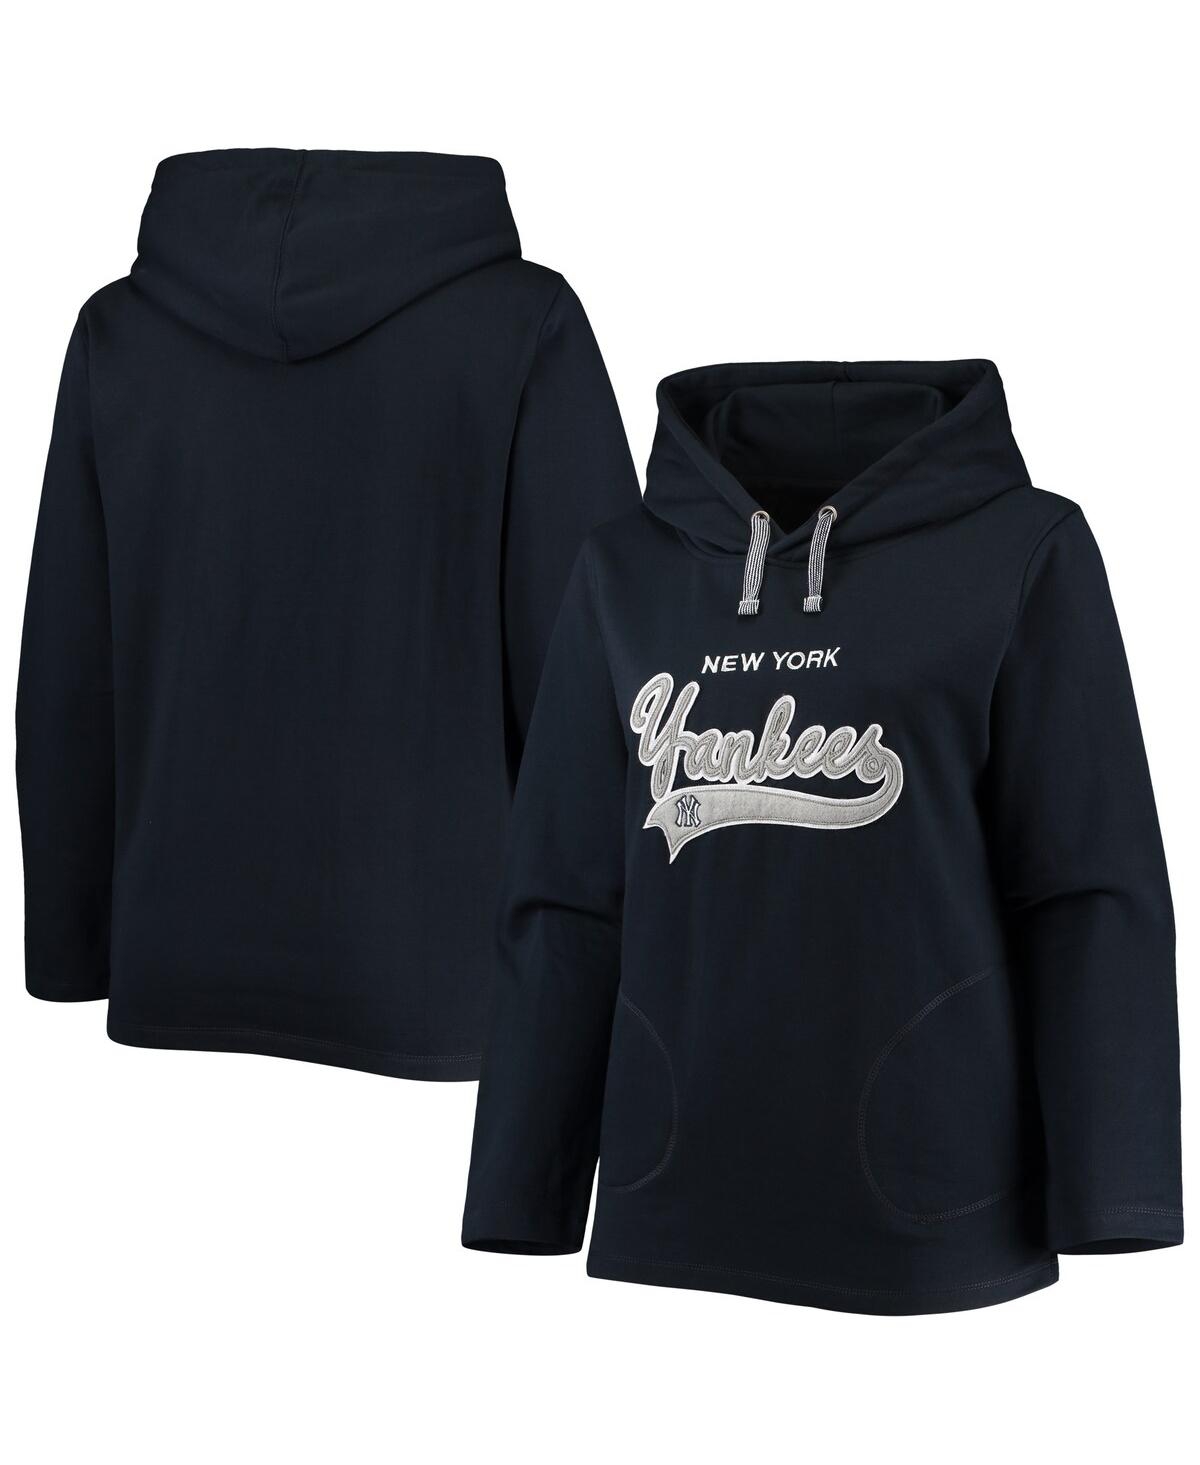 Shop Soft As A Grape Women's  Navy New York Yankees Plus Size Side Split Pullover Hoodie